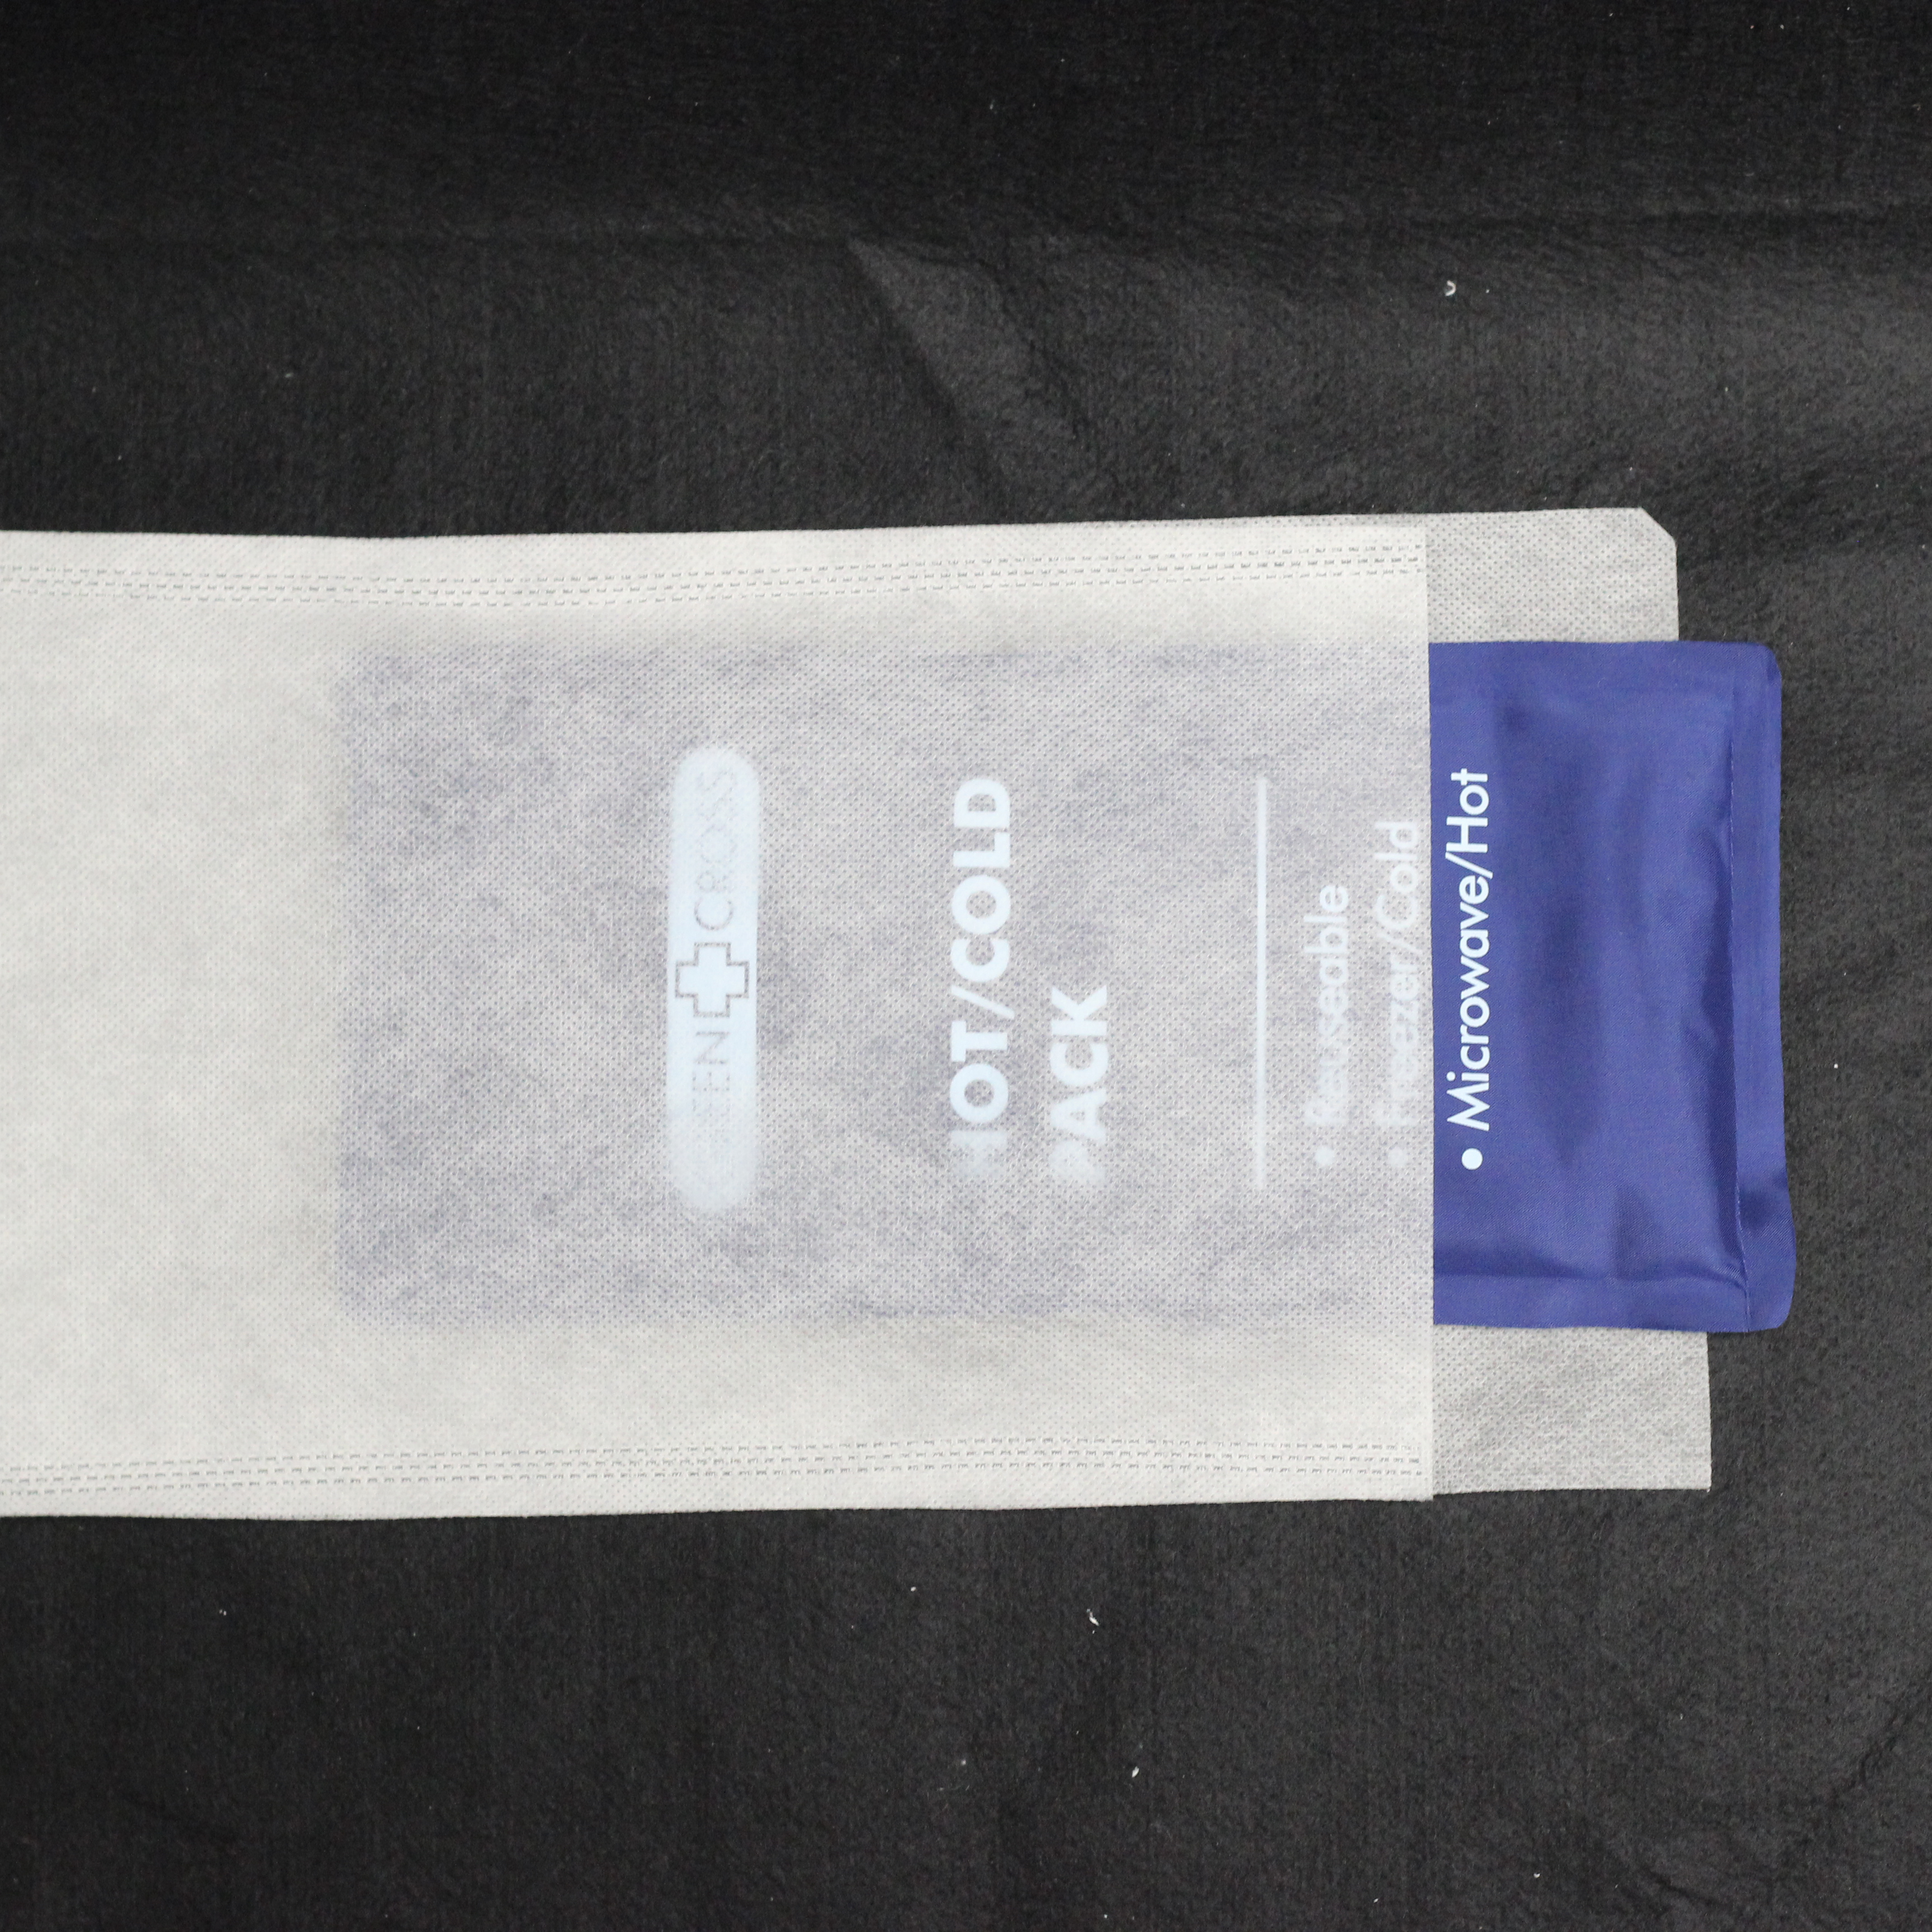 cold pack sleeve